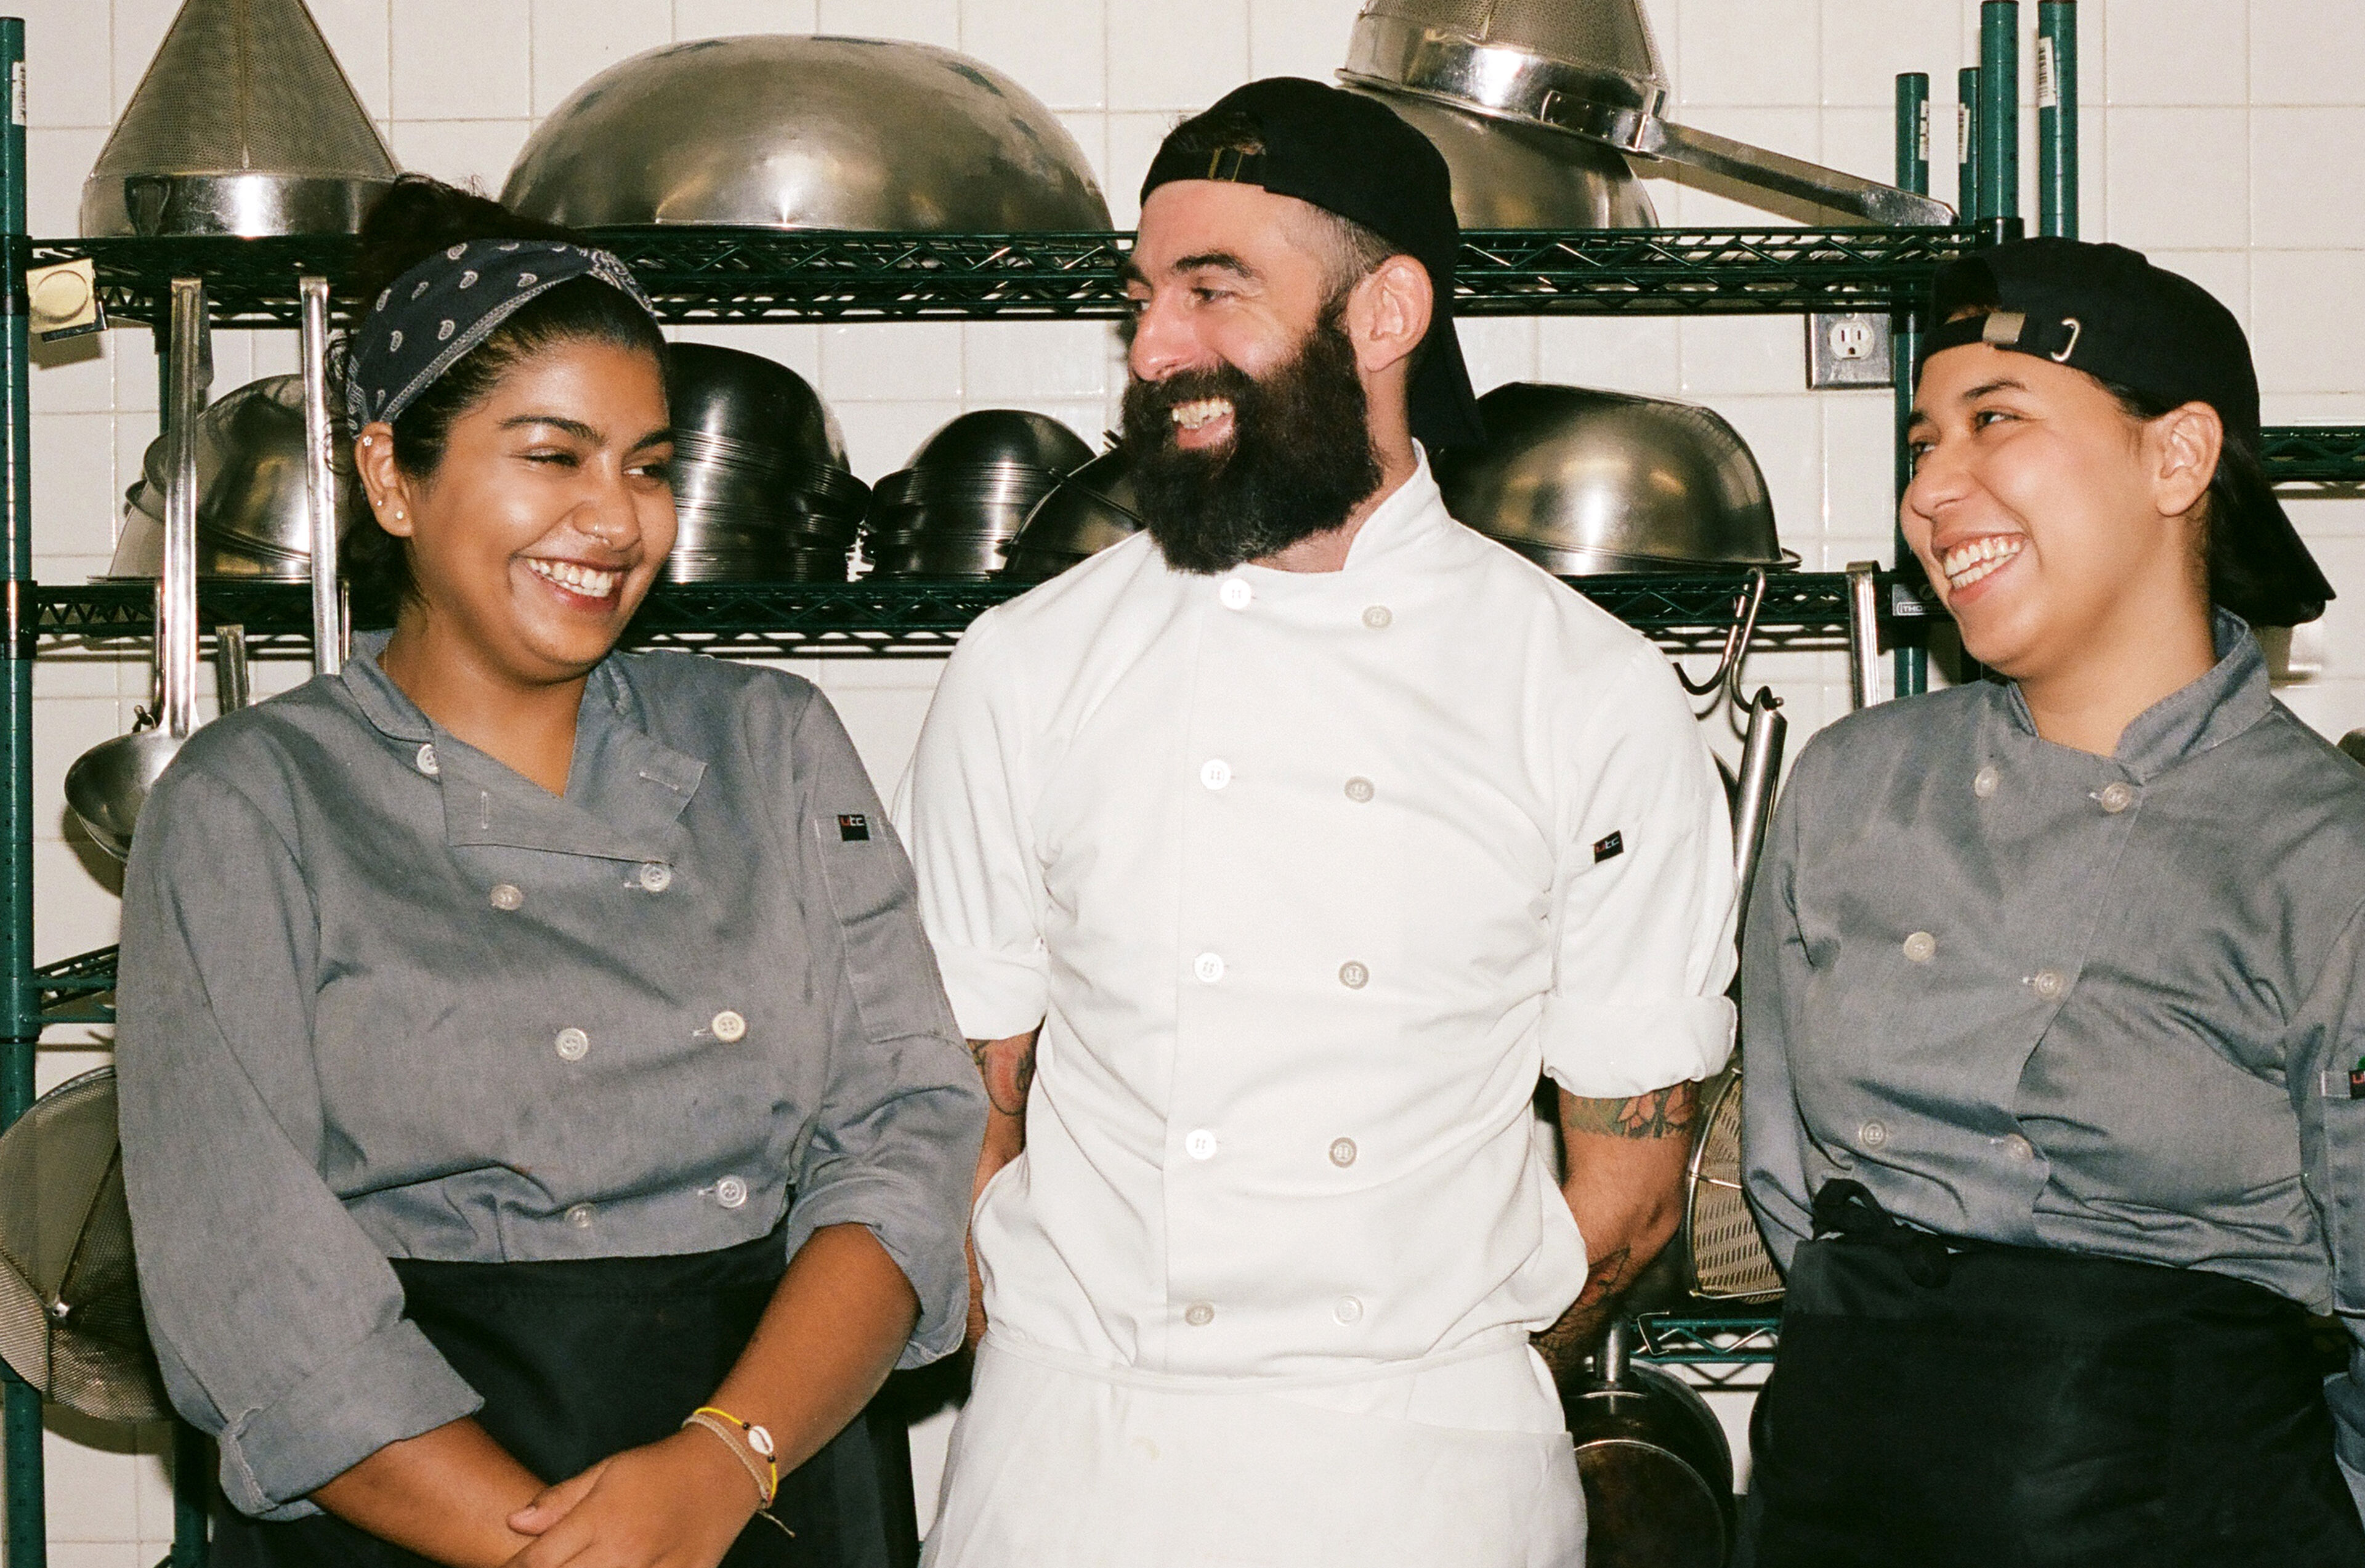 Three chefs sharing a joyful moment in a busy commercial kitchen, with stainless steel pots and shelves in the background.